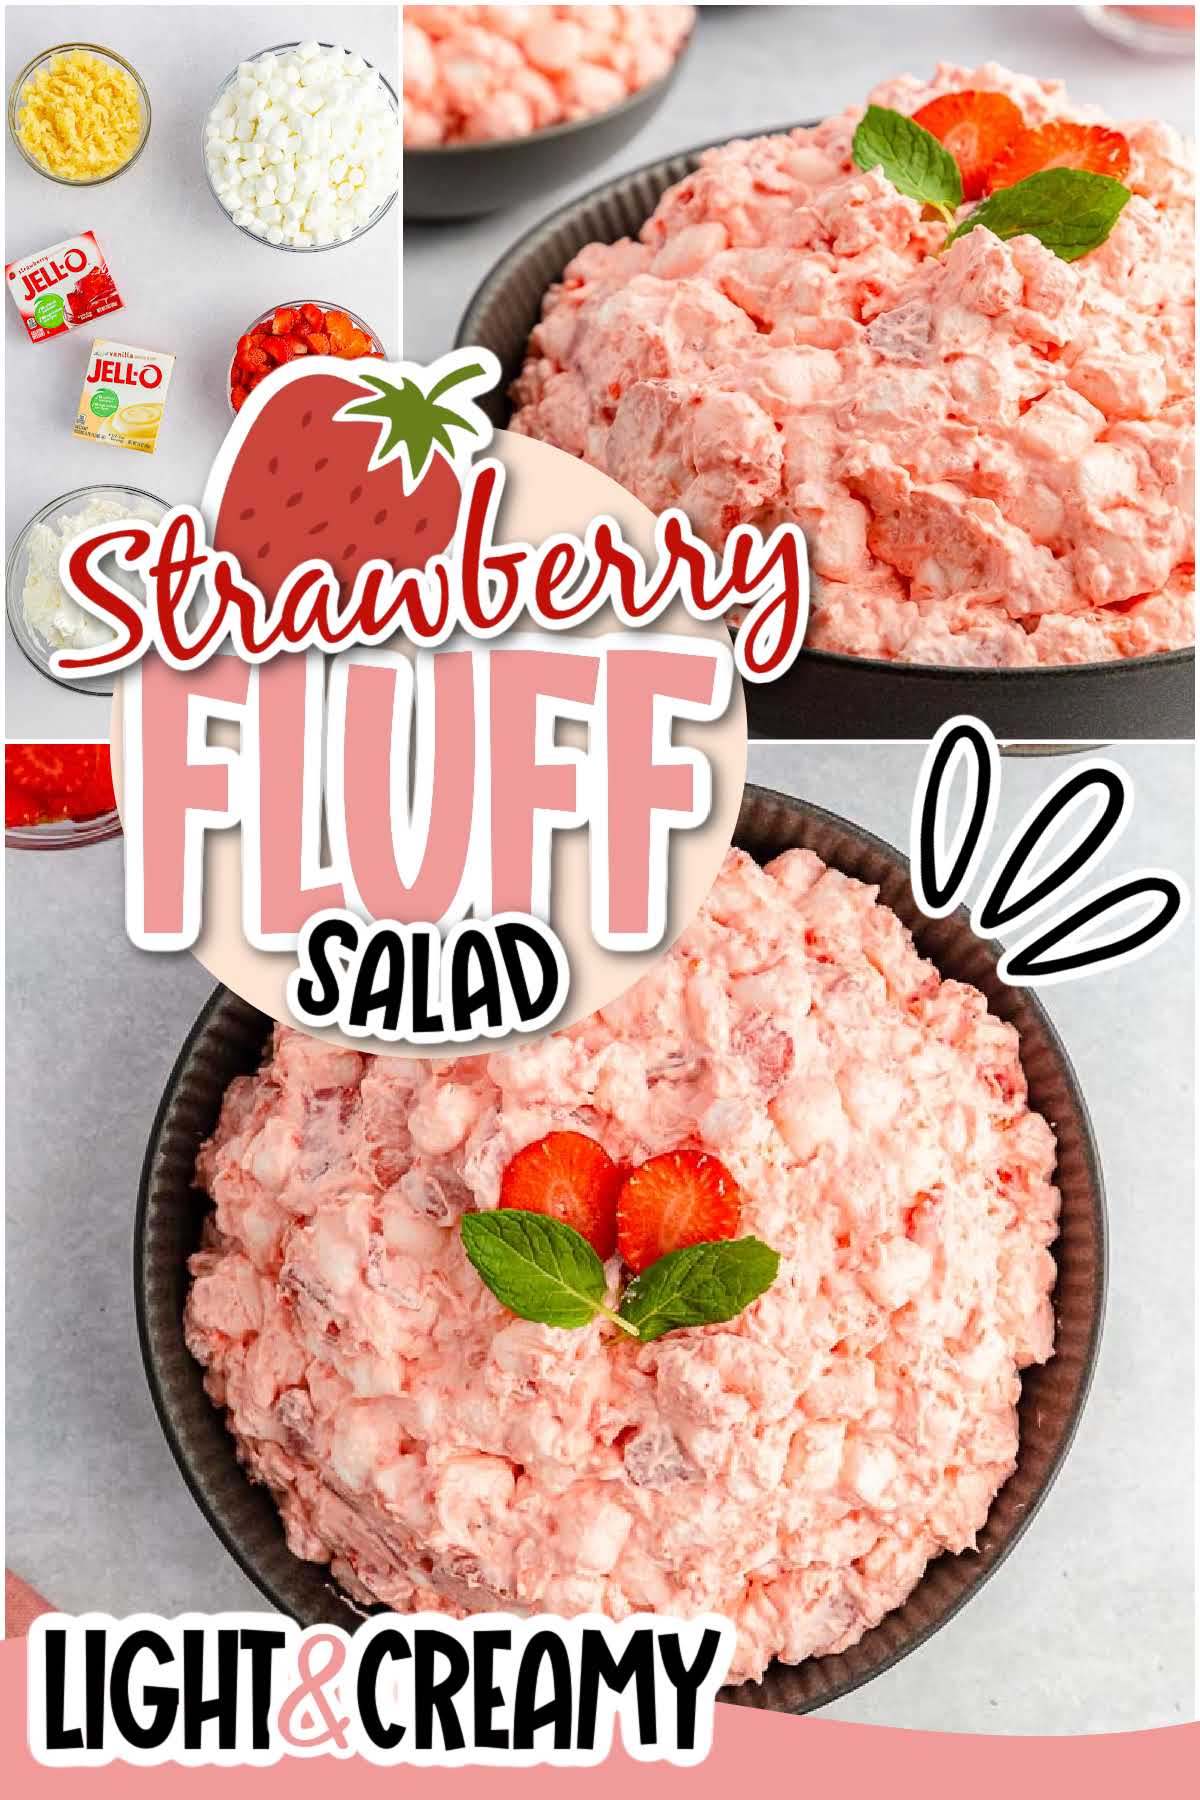 Three images of Strawberry Fluff Salad ingredients and bowls filled with jello salad with text overlay.